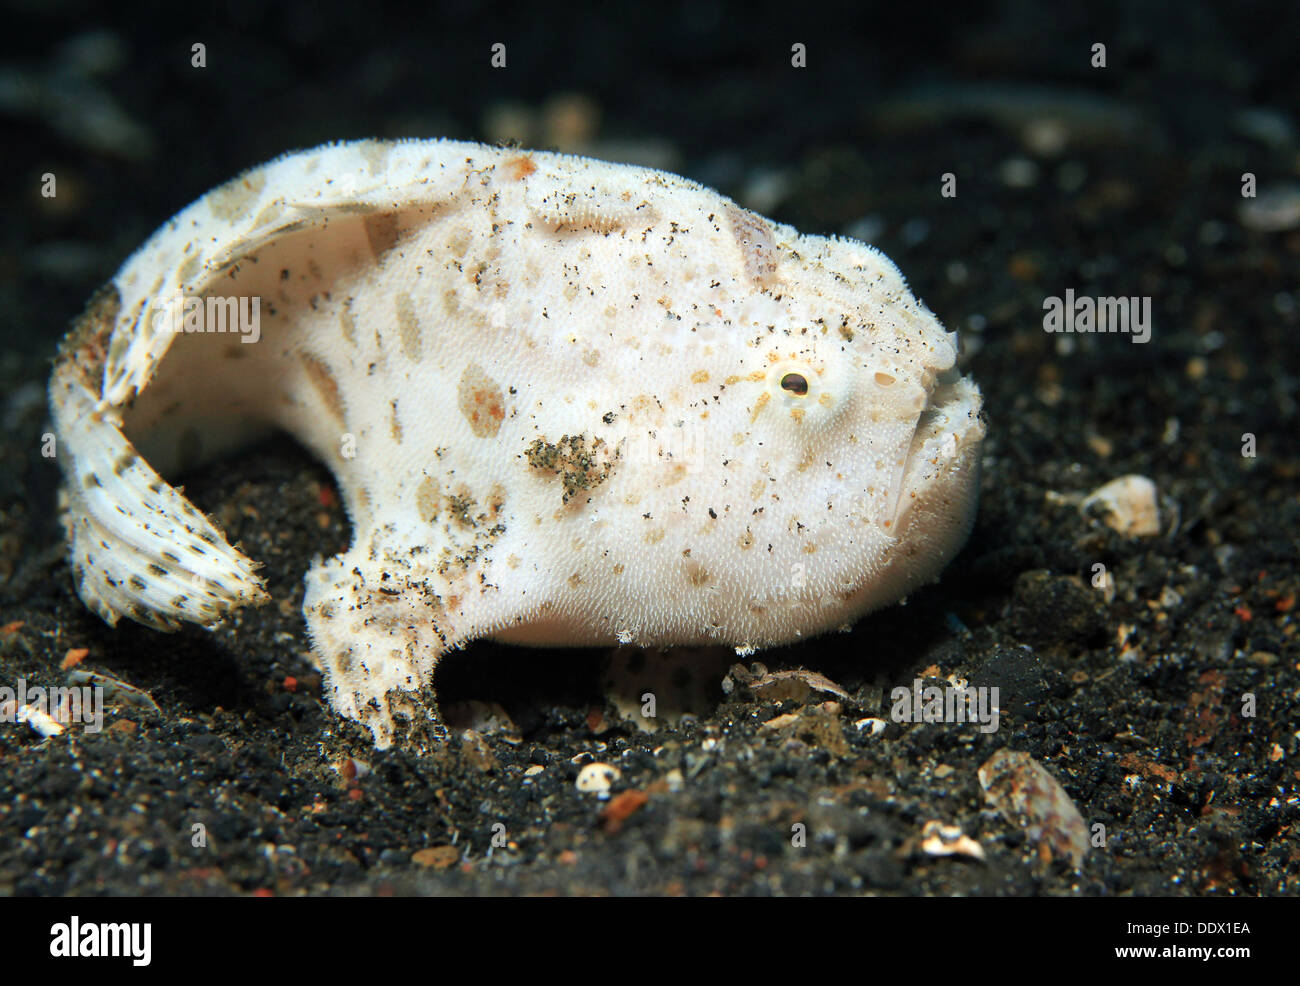 Close-up of a Juvenile Shaggy Frogfish (Antennarius Hispidus) on Black Sand Bottom, Lembeh Strait, Indonesia Stock Photo